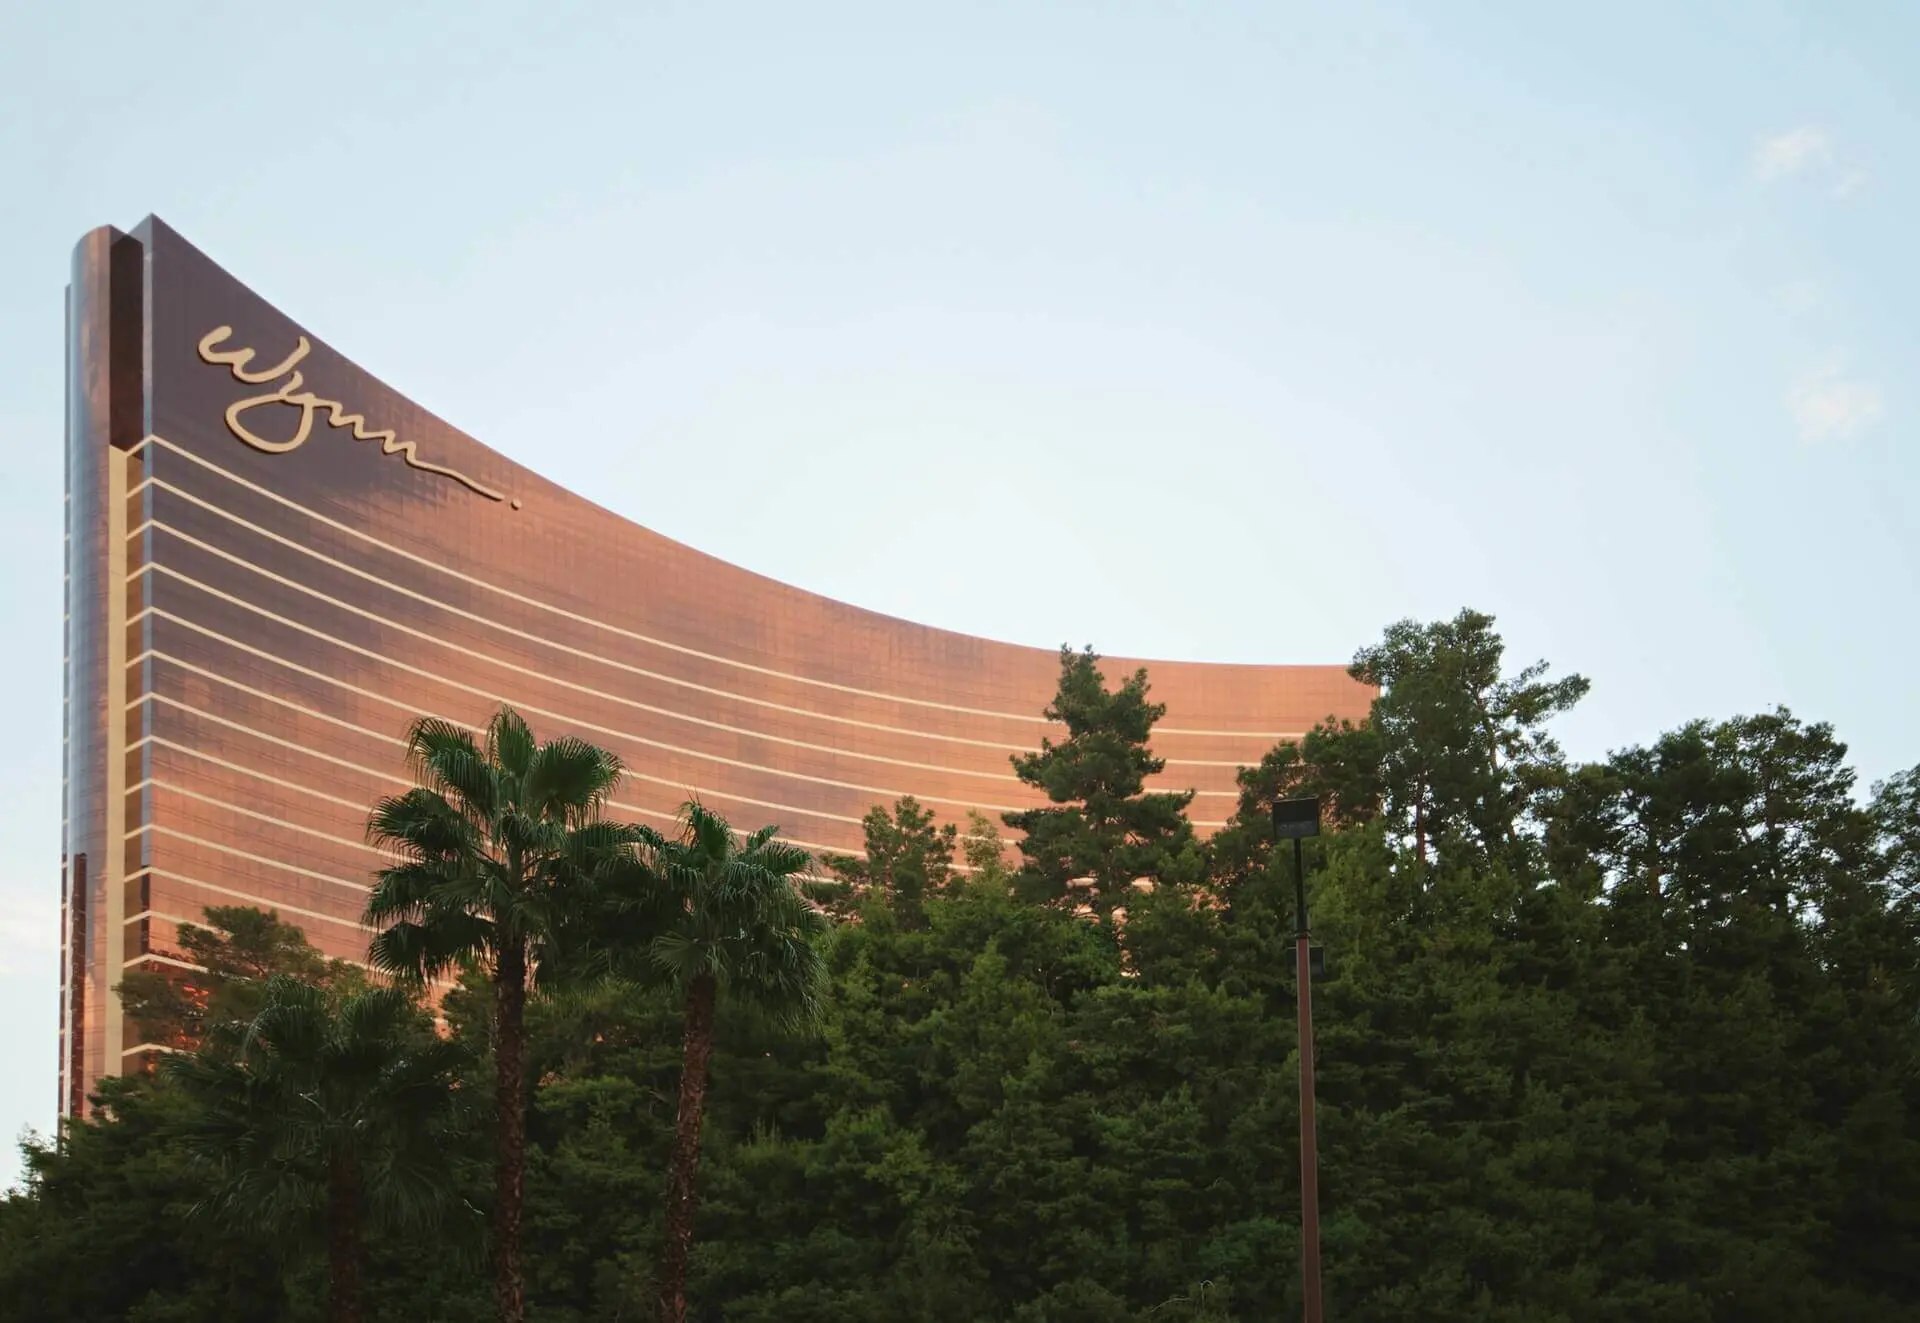 Image shows the golden looking Wynn casino and hotel in Las Vegas peeking out over some palm trees 